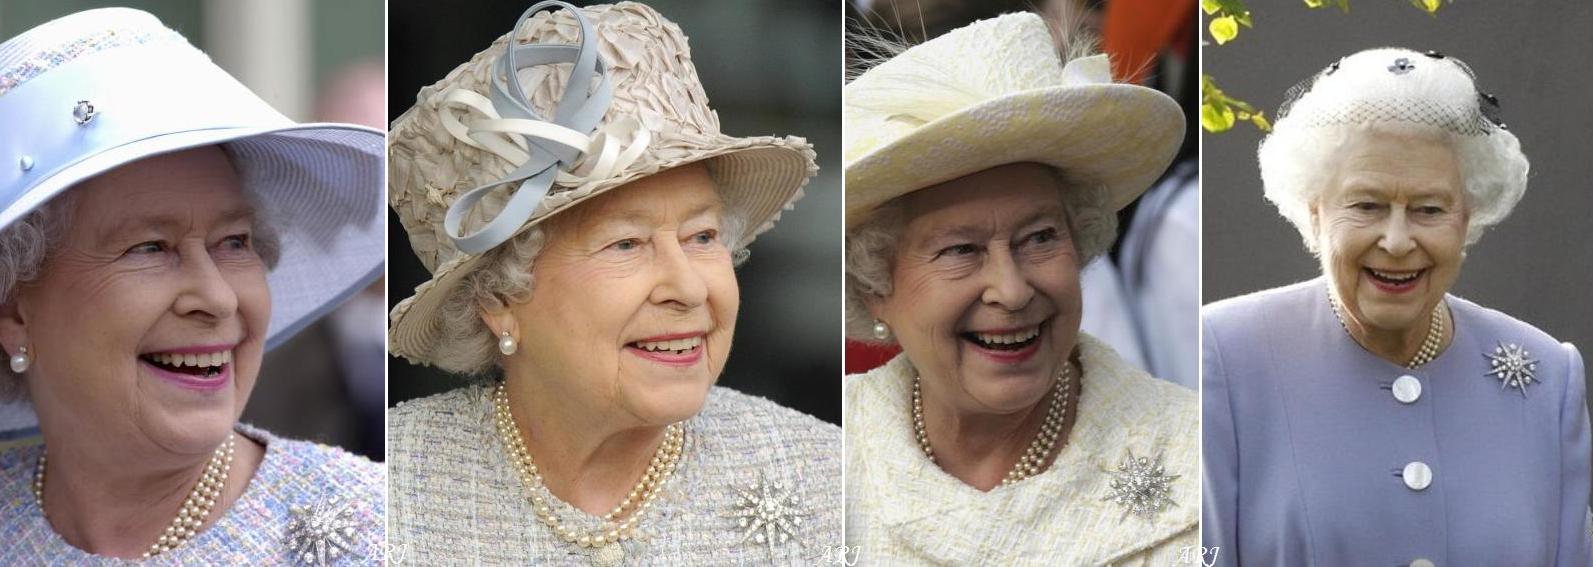 52112107-queen-elizabeth-ll-looking-up-and-smiling-gettyimages.jpg